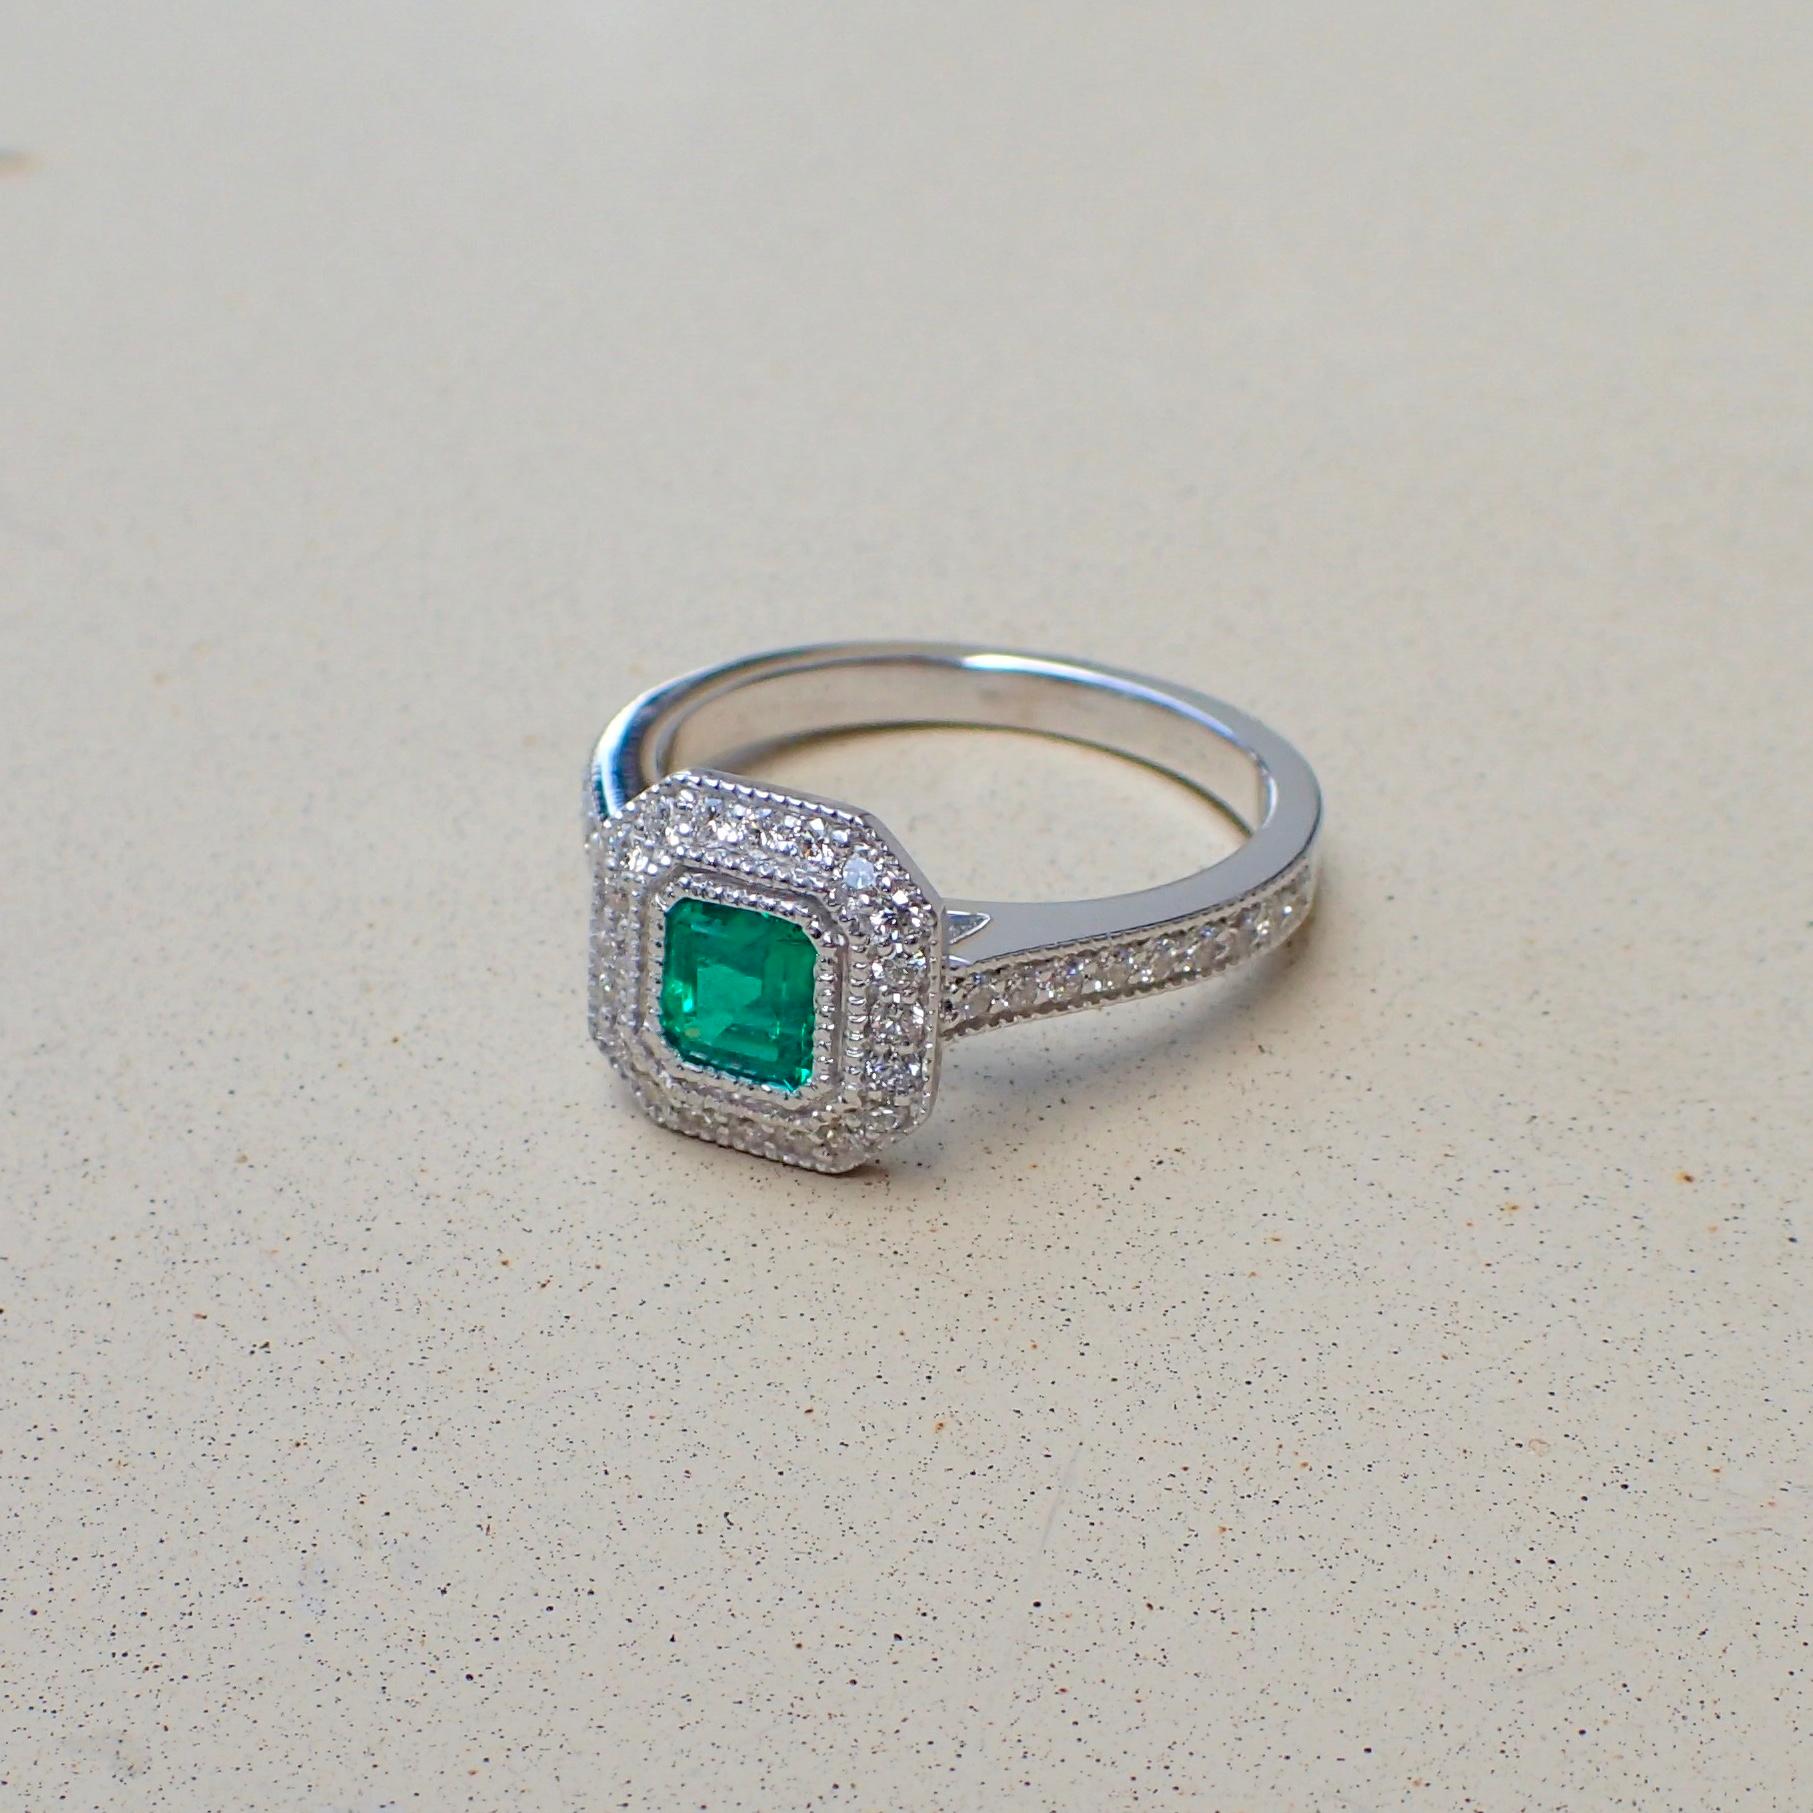 18 Karat White Gold Ring with a 0.518 Carat Emerald and 0.37 Carat of Diamond 3